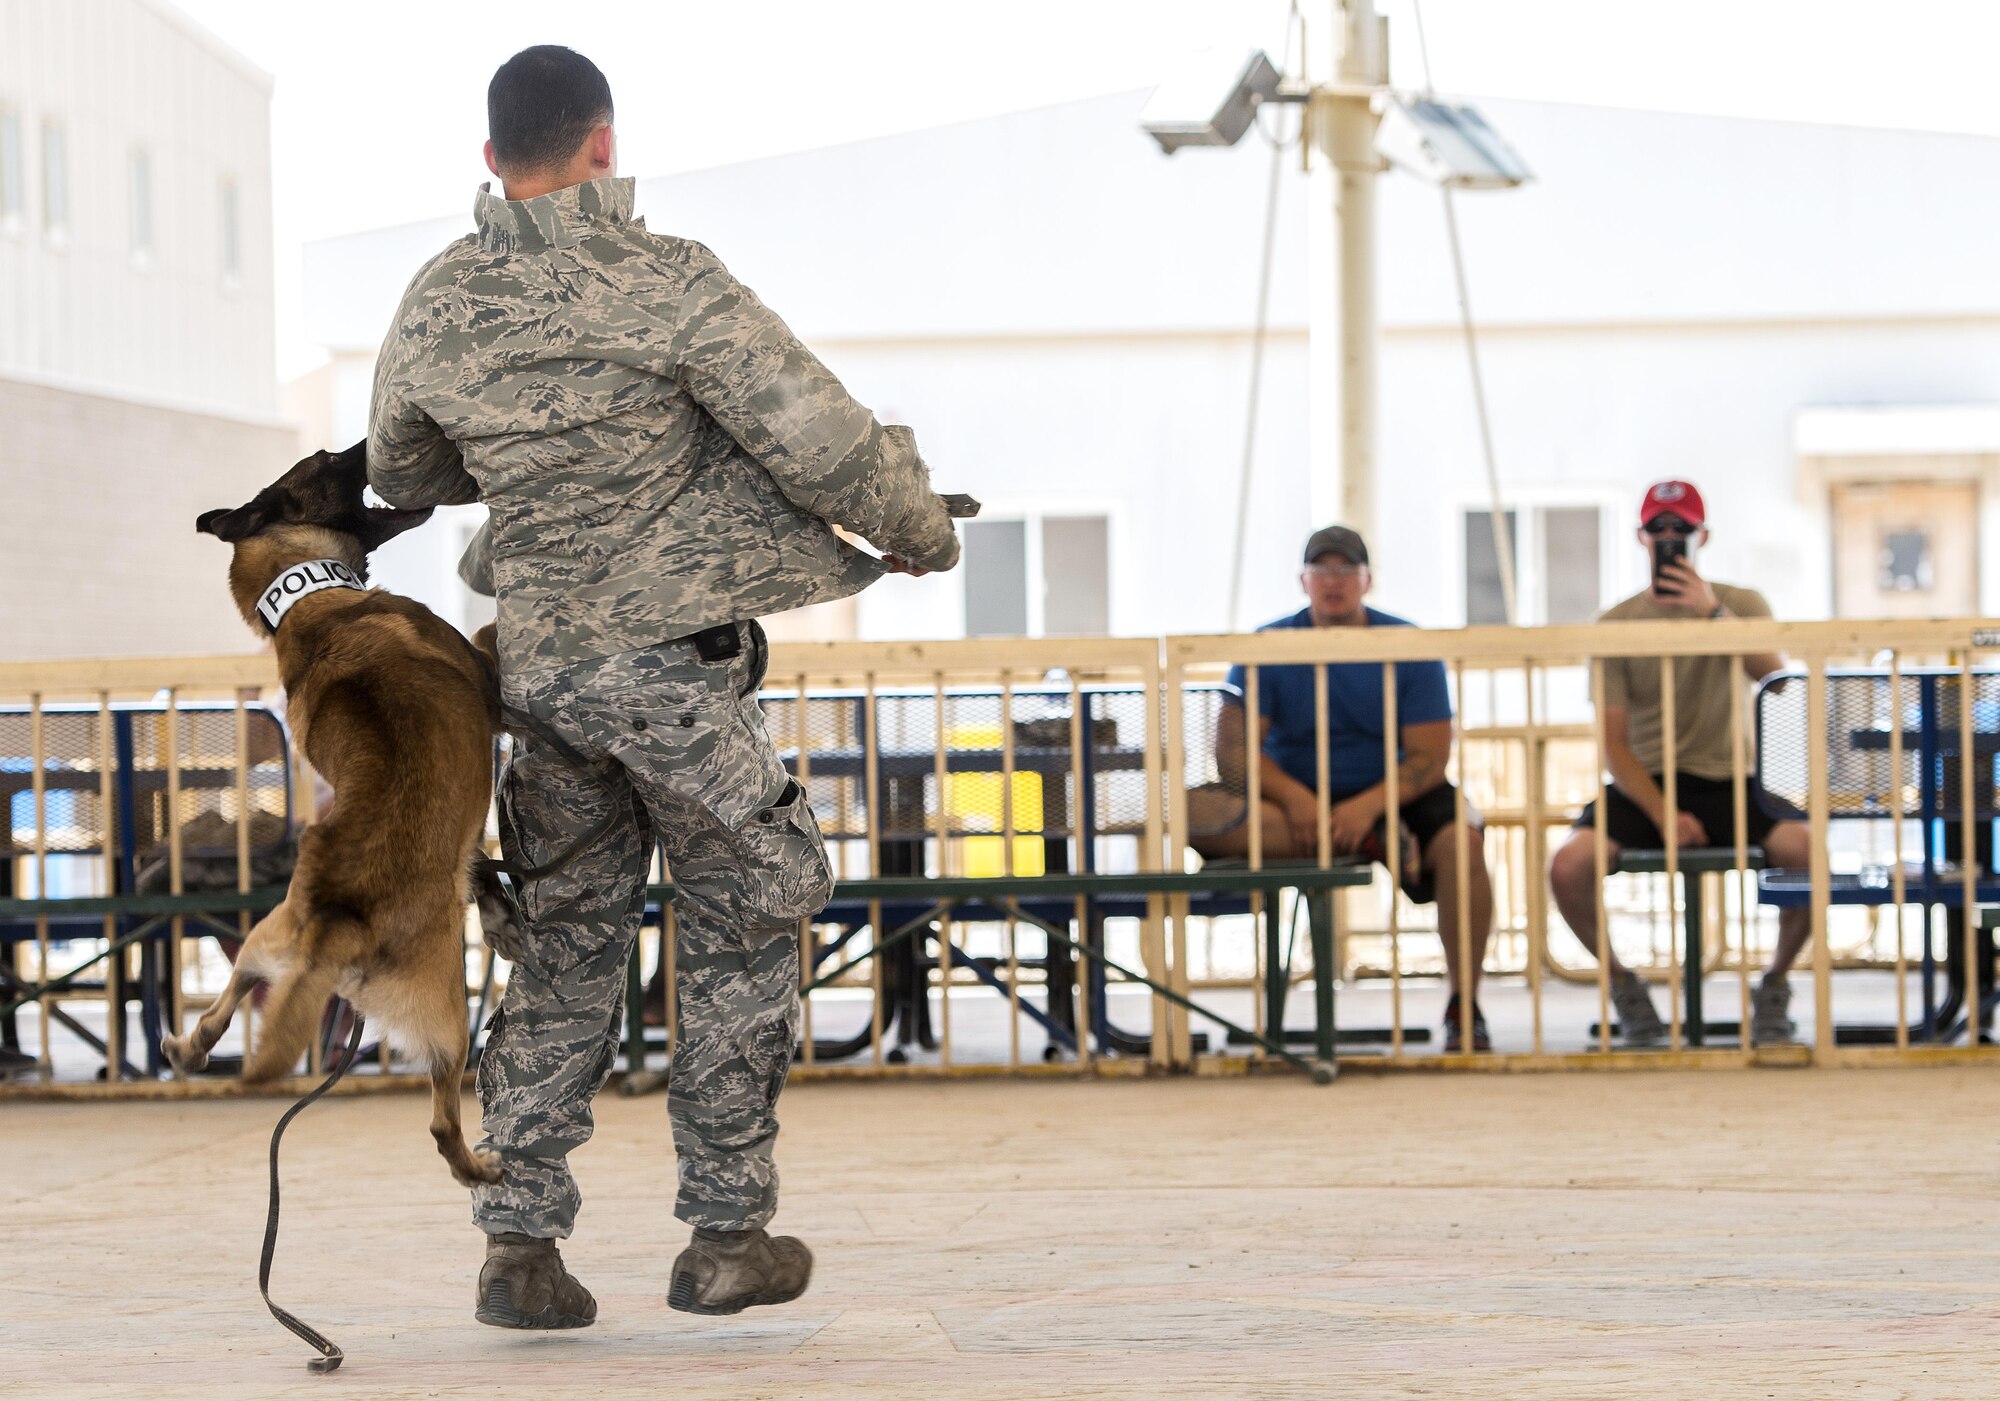 Tze, a military working dog, latches onto Air Force Staff Sgt. Jonathan Calo during a K-9 demonstration May 12, 2015, at Memorial Plaza on Al Udeid Air Base, Qatar. Calo, a military working dog handler, and Tze are assigned to the 379th Expeditionary Security Forces Squadron. The 379th ESFS held other various events during National Police Week consisting of an opening ceremony, a fallen officer memorial 5K run, and a "Defender Challenge". (U.S. Air Force photo by Tech. Sgt. Douglas)